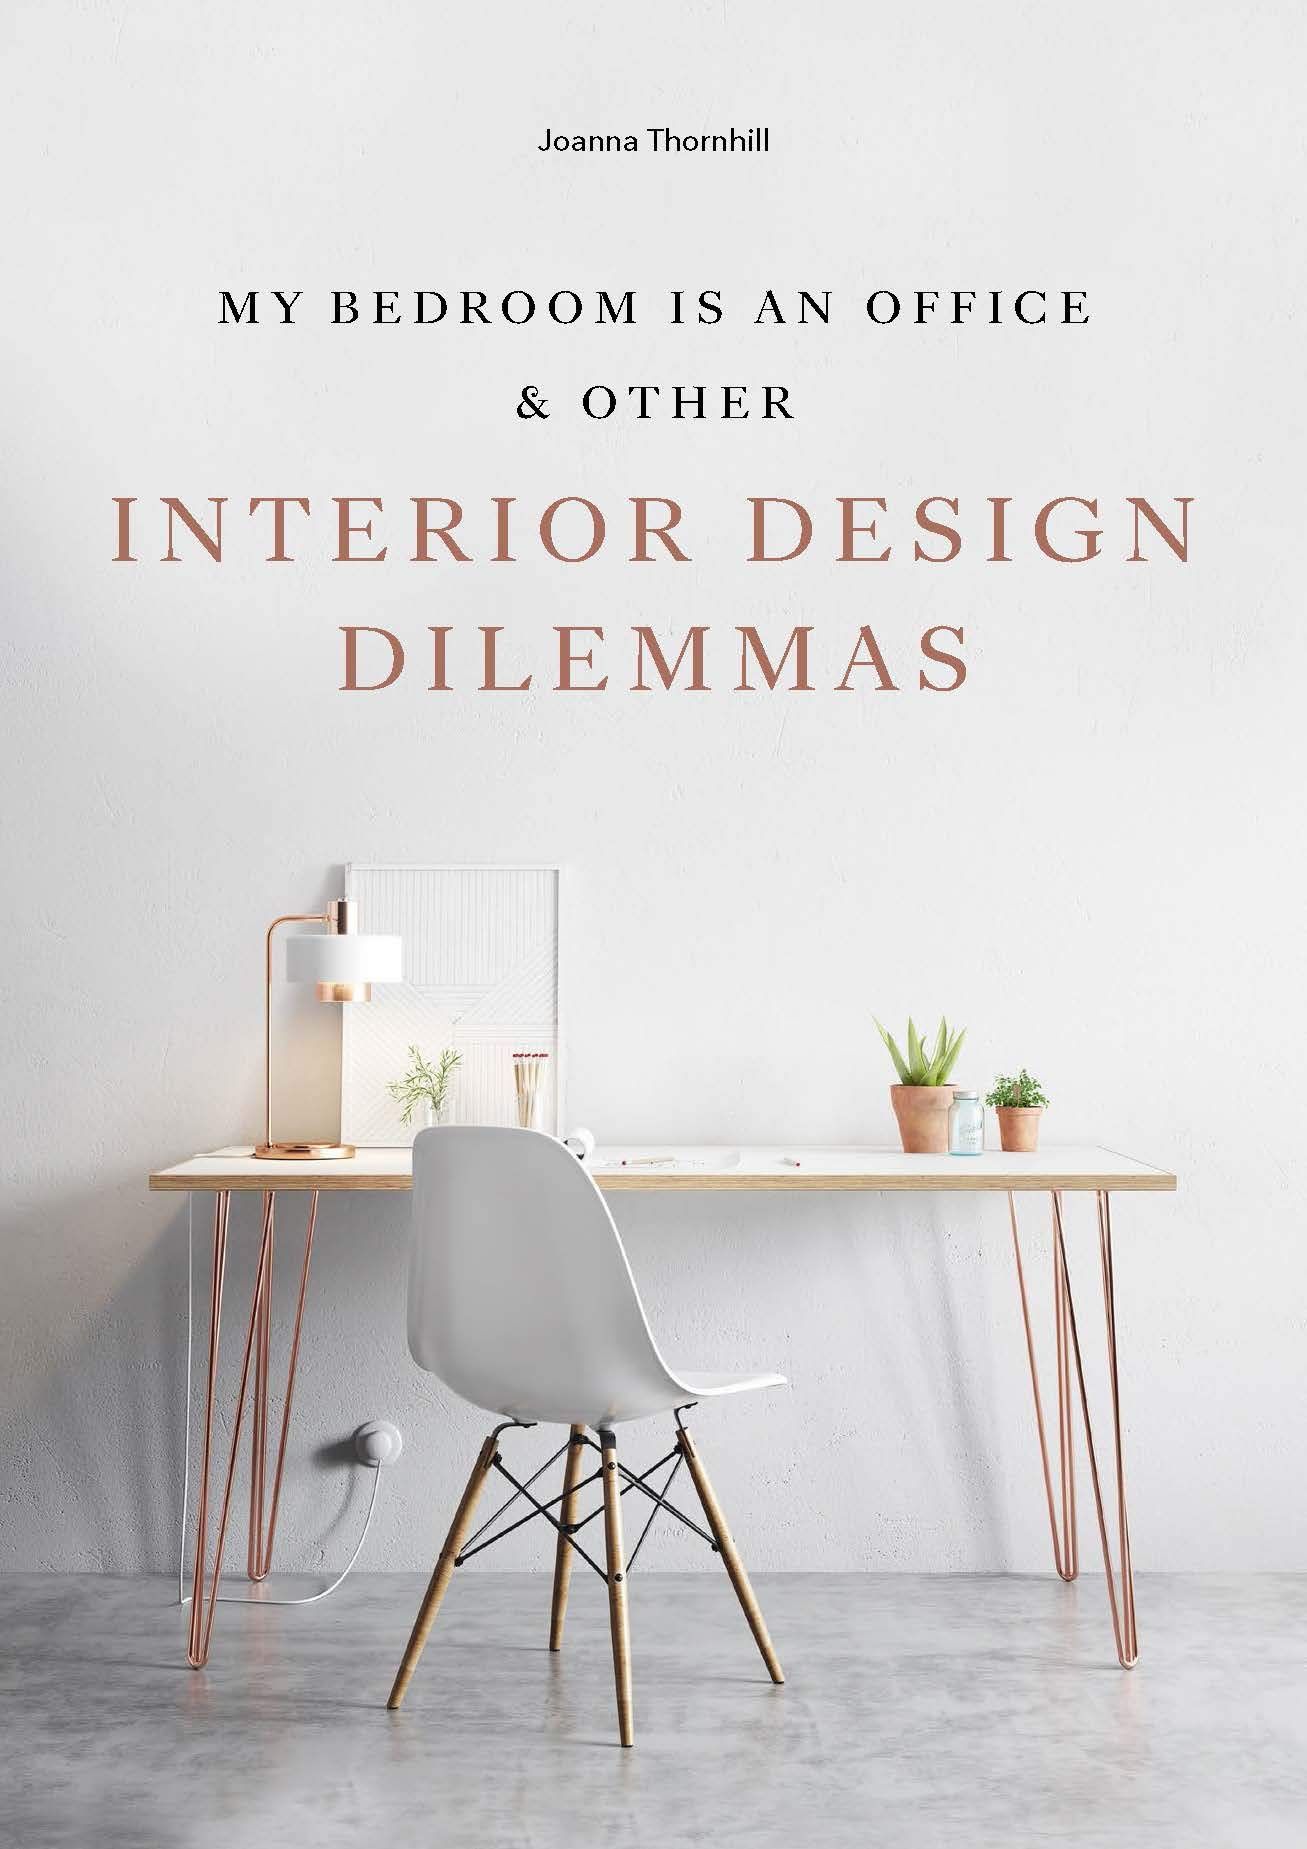  My Bedroom Is An Office_Joanna Thornhill_9781786273864_Laurence King Publishing 